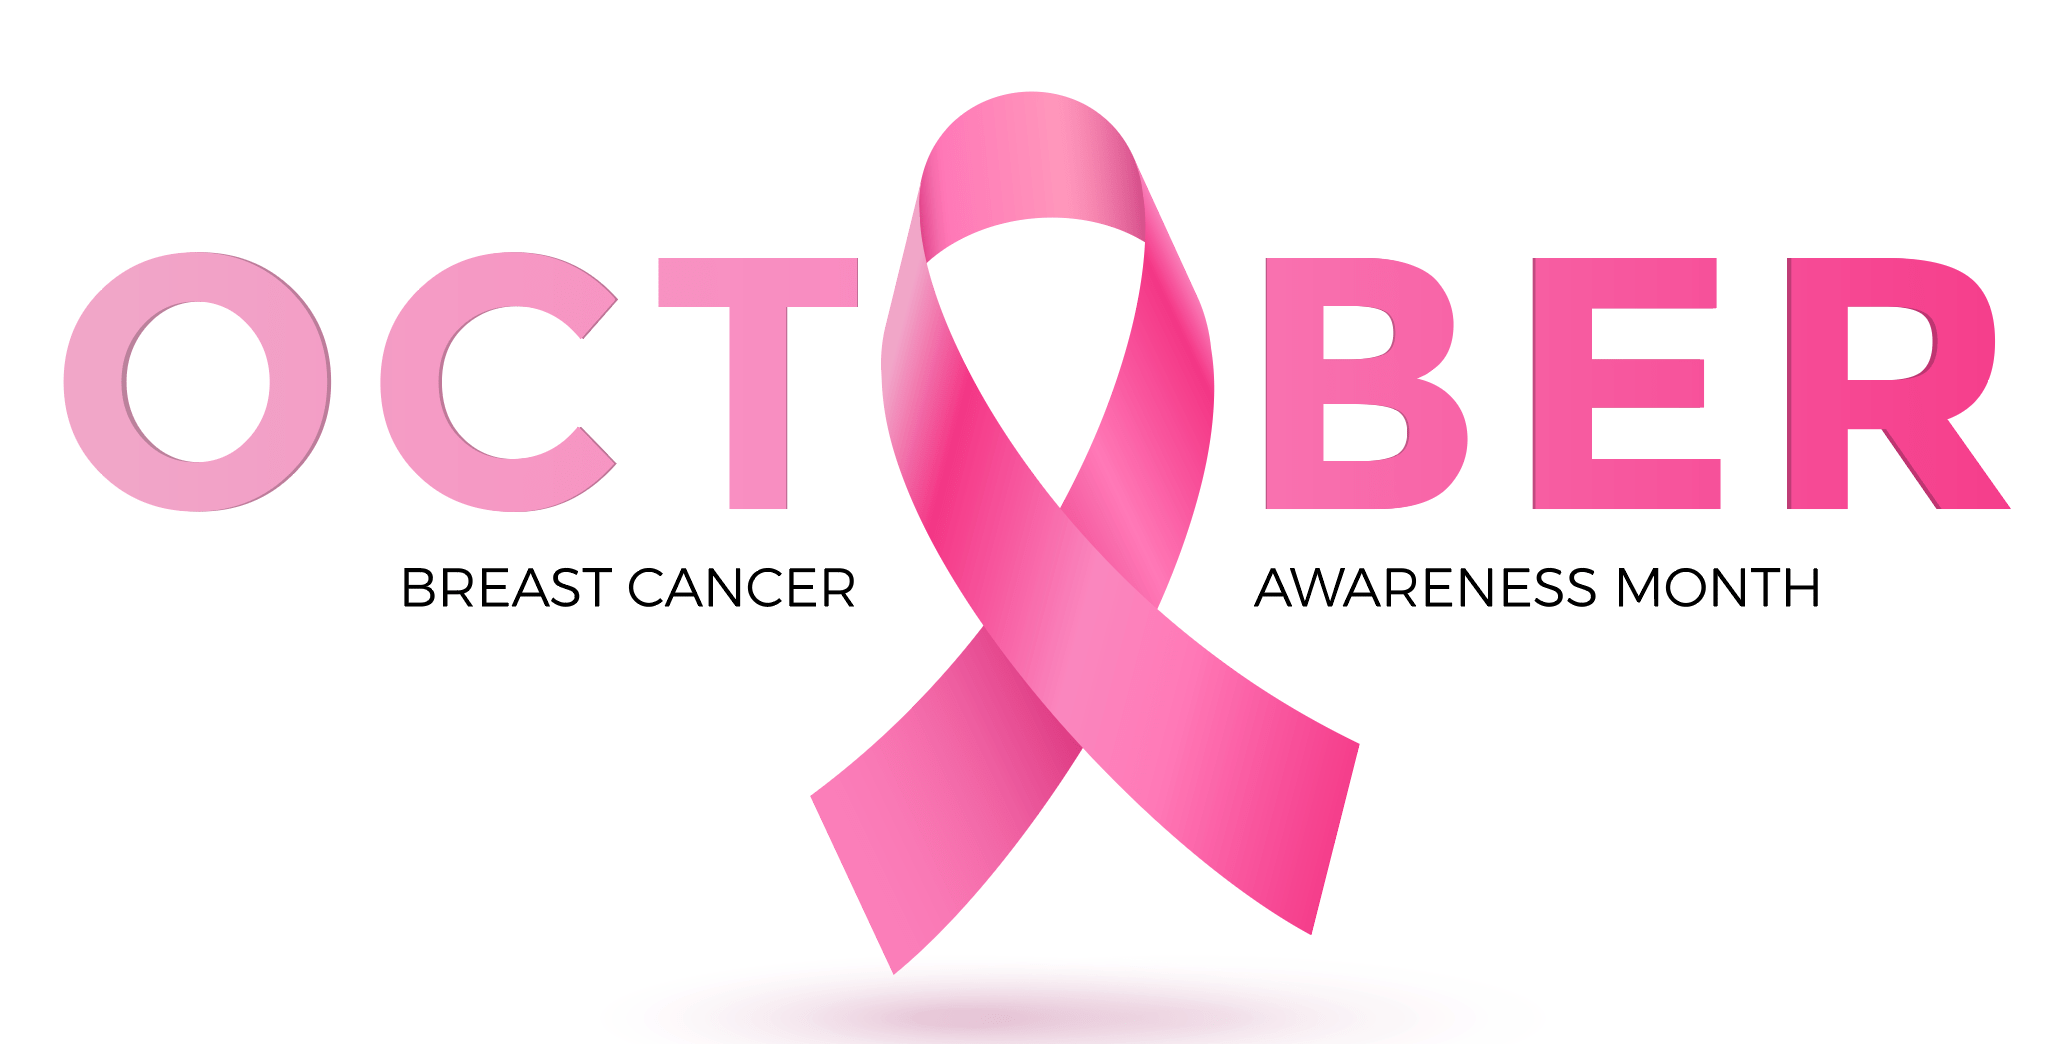 Breast cancer manifestation in younger women and its challenges